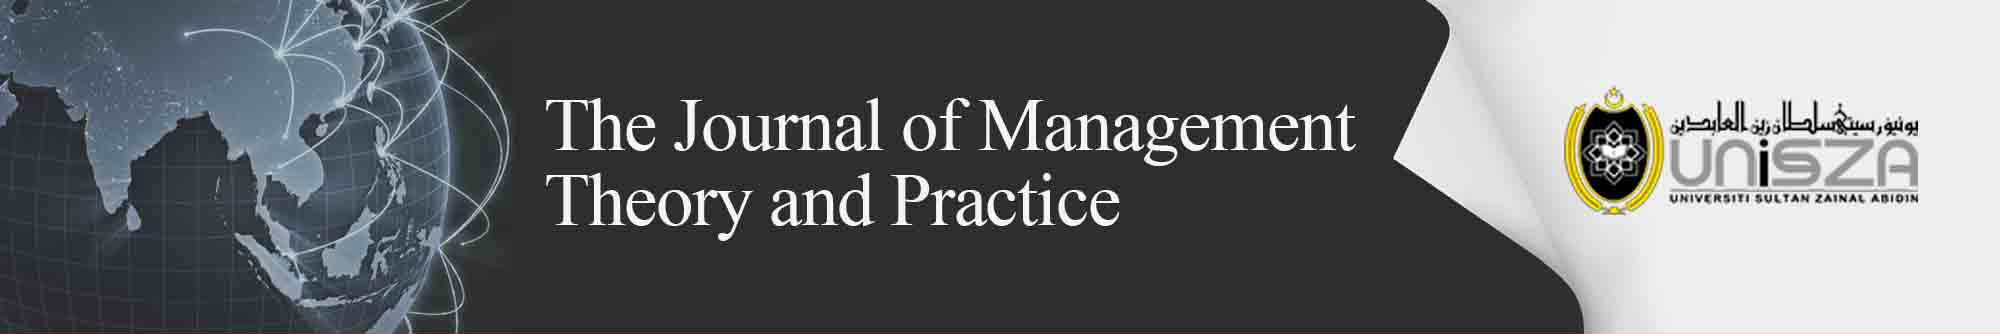 The Journal of Management Theory and Practice (JMTP)